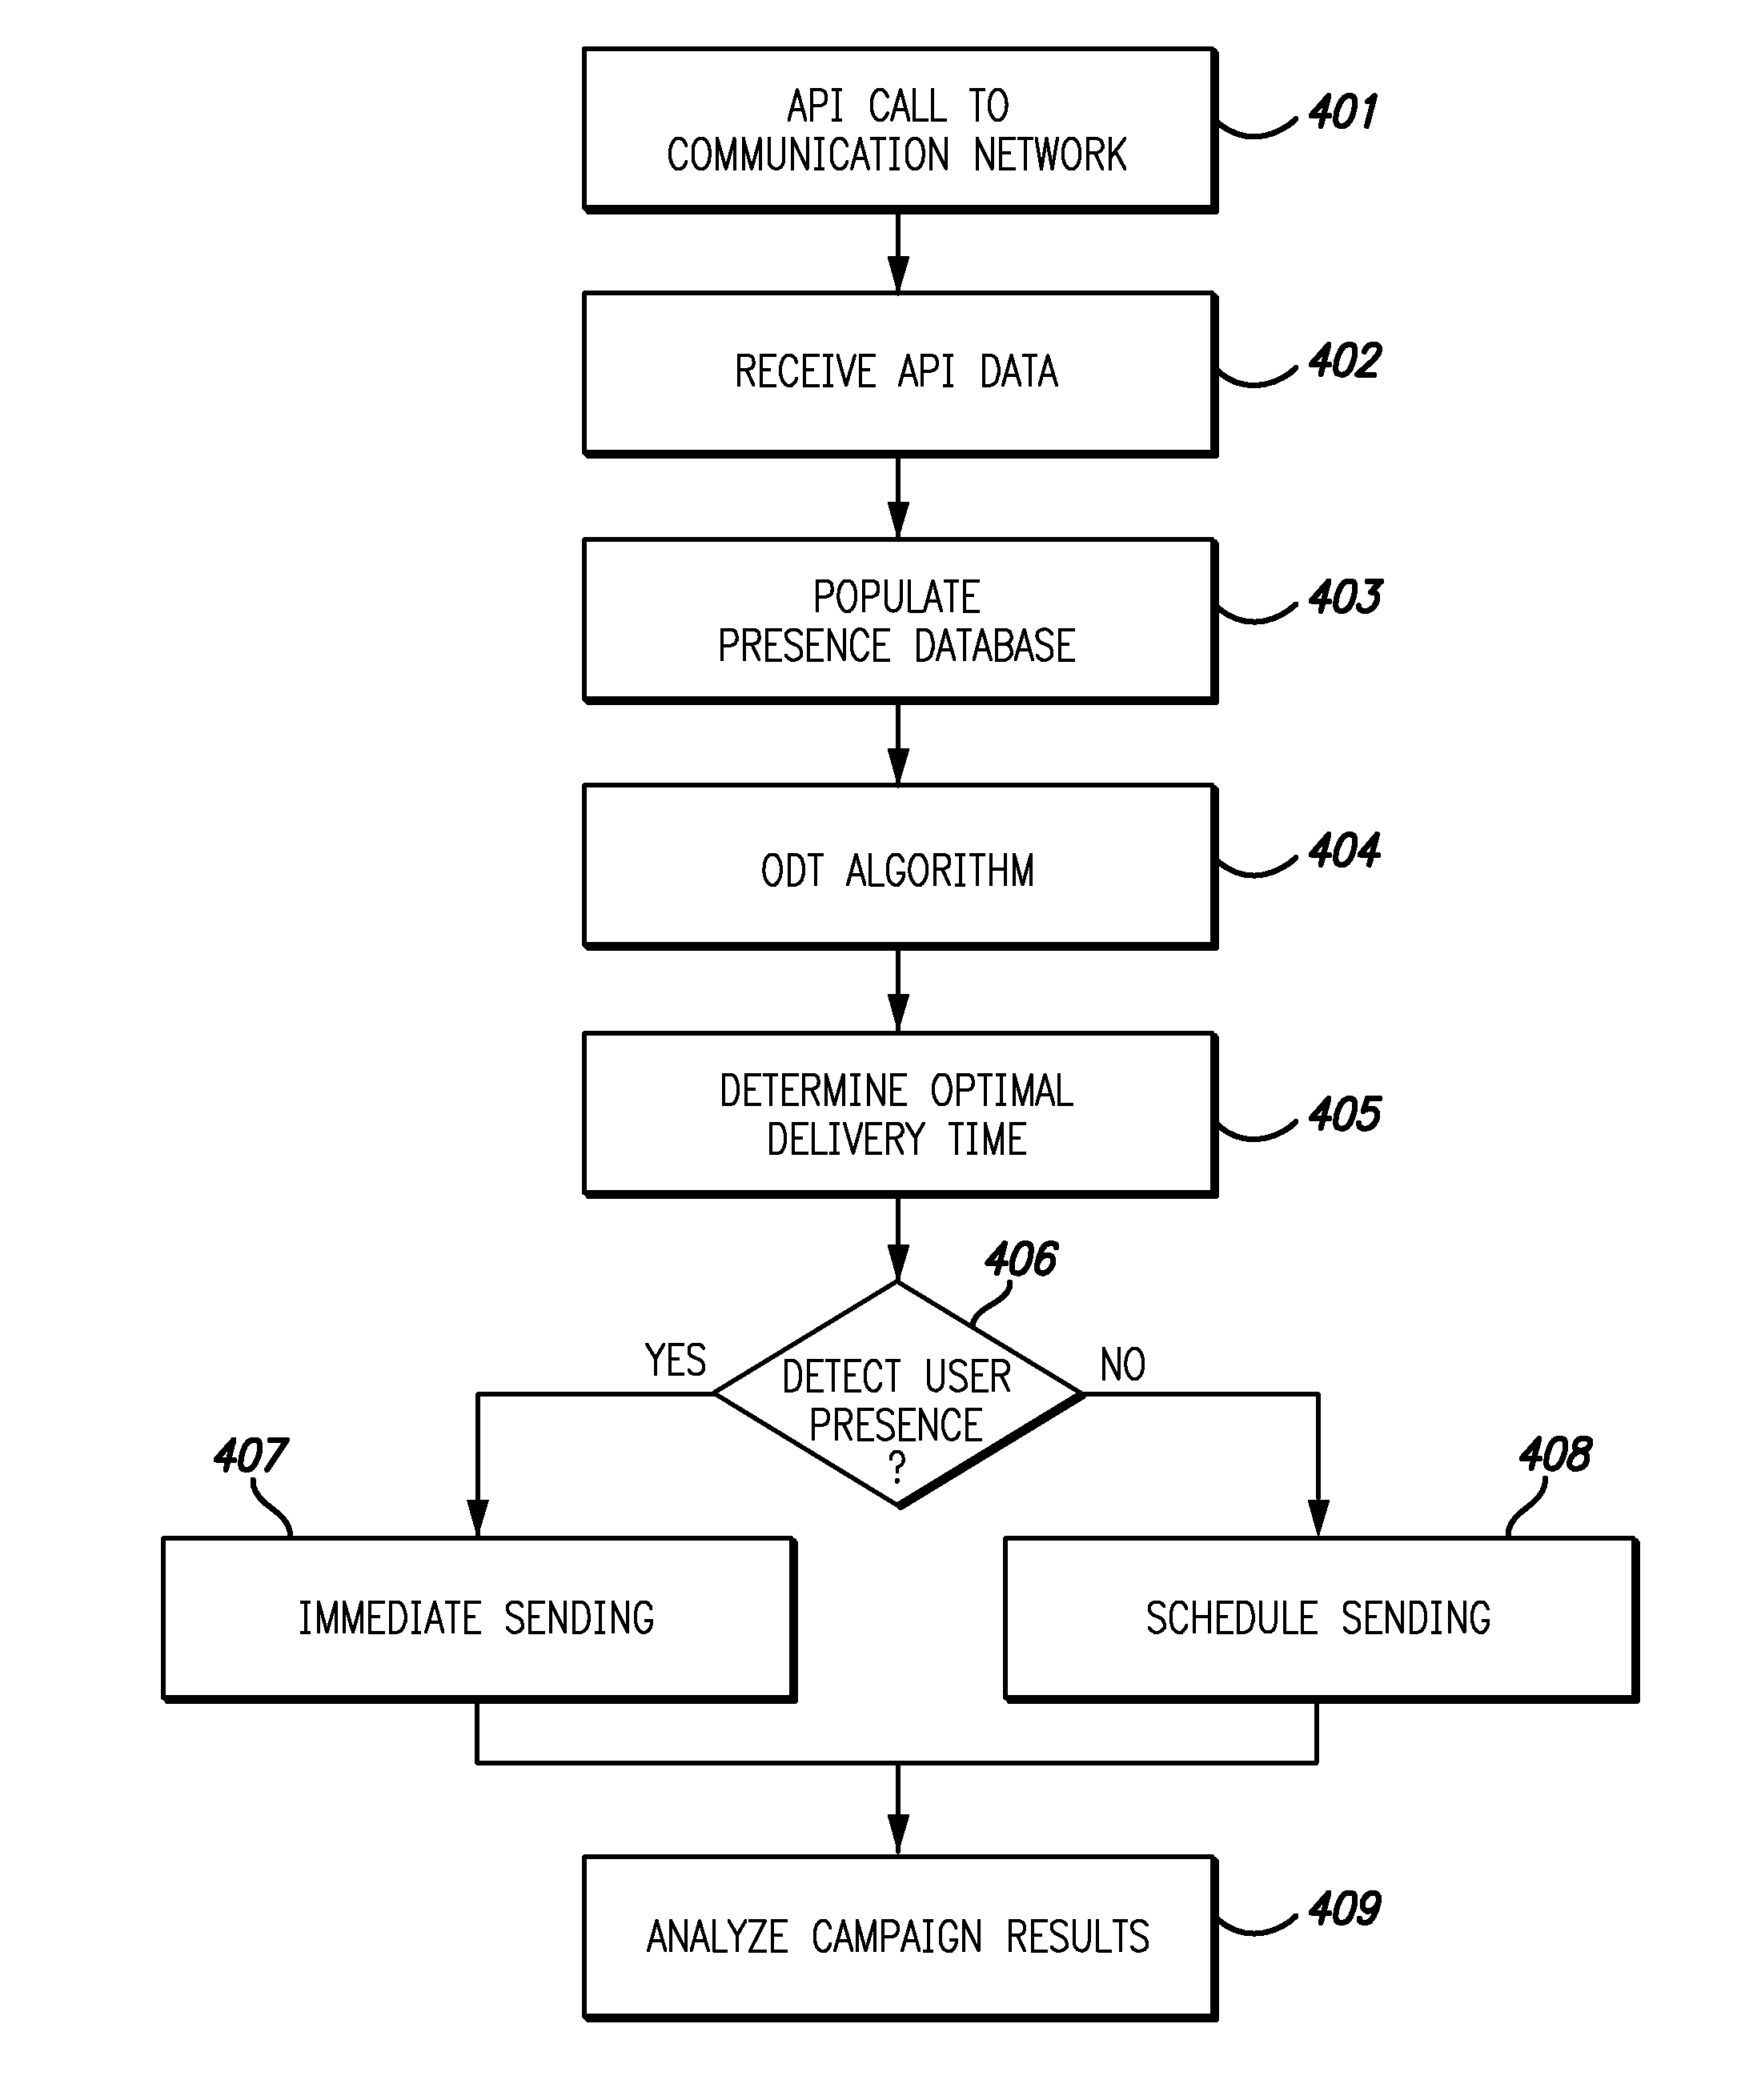 Method and System for Using Timestamps and Algorithms Across Email and Social Networks to Identify Optimal Delivery Times for an Electronic Personal Message